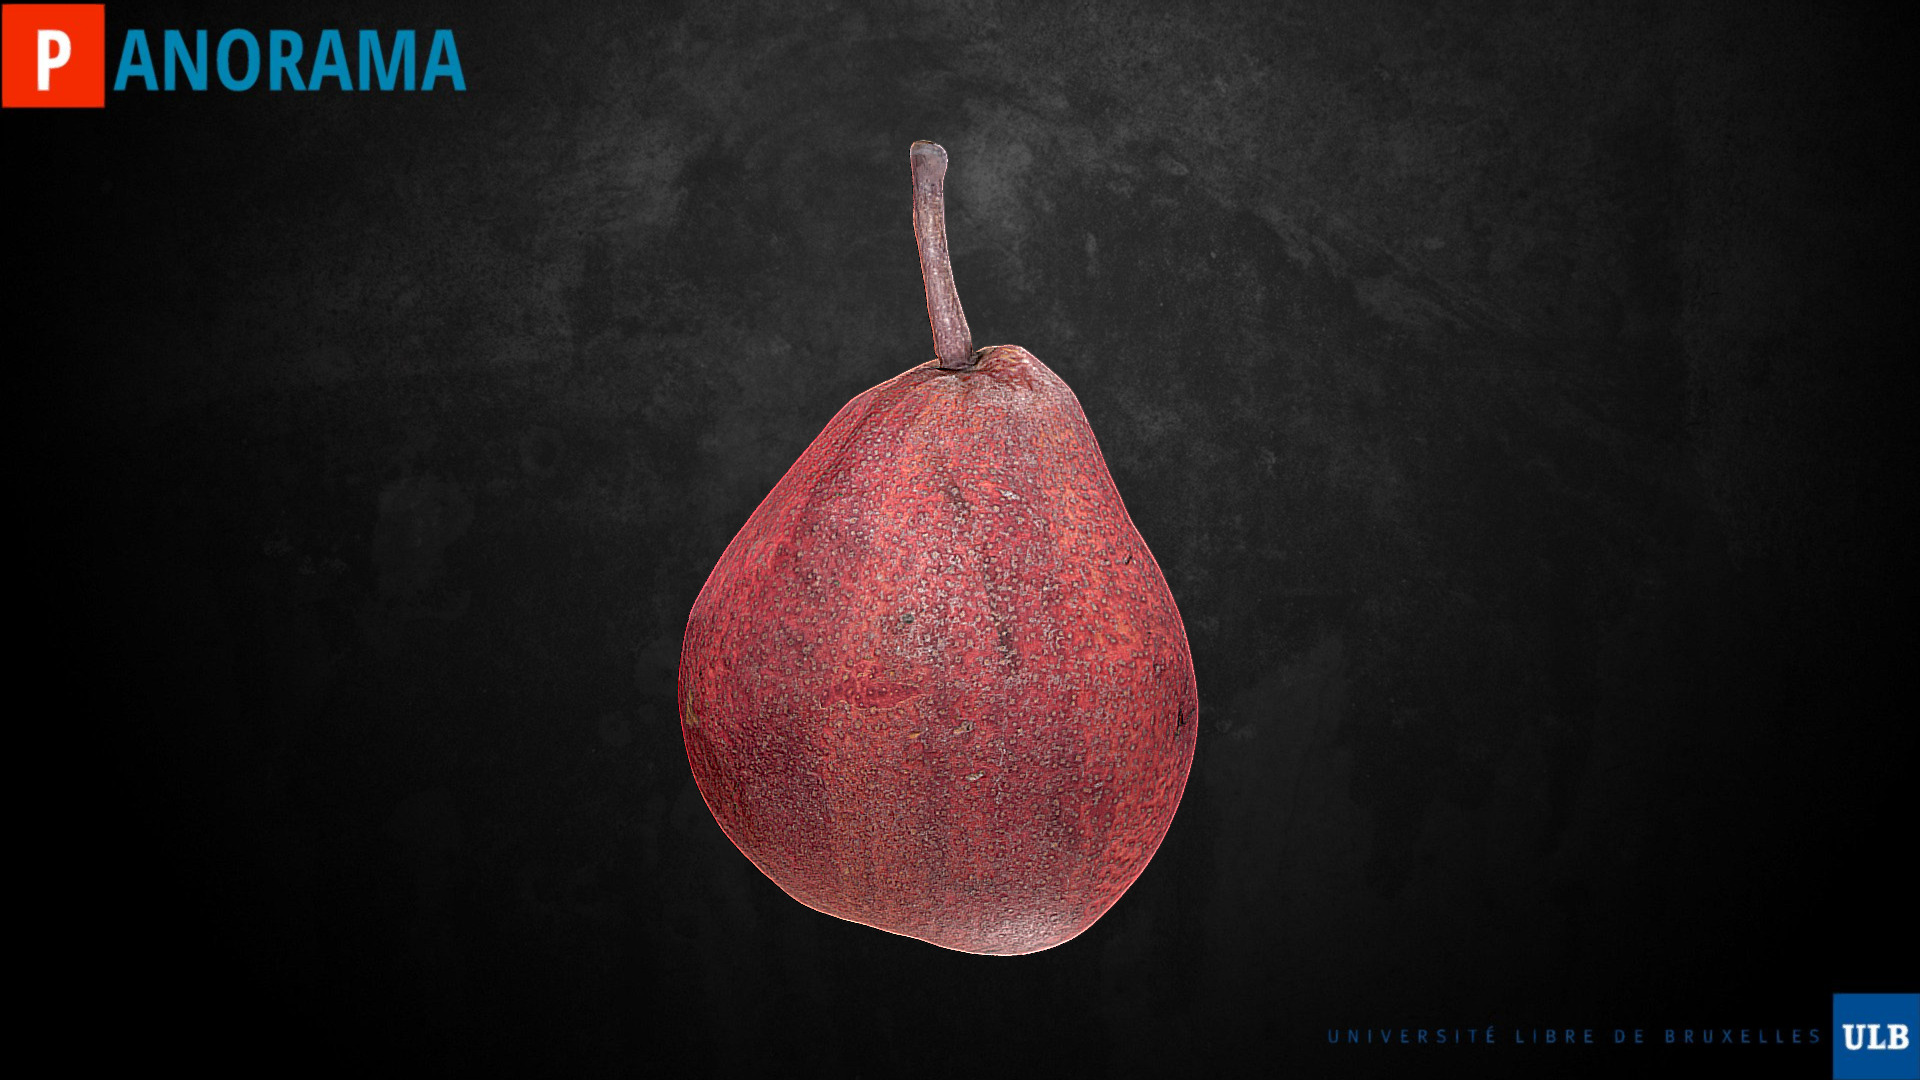 3D model Poire rouge - This is a 3D model of the Poire rouge. The 3D model is about a red apple on a black background.